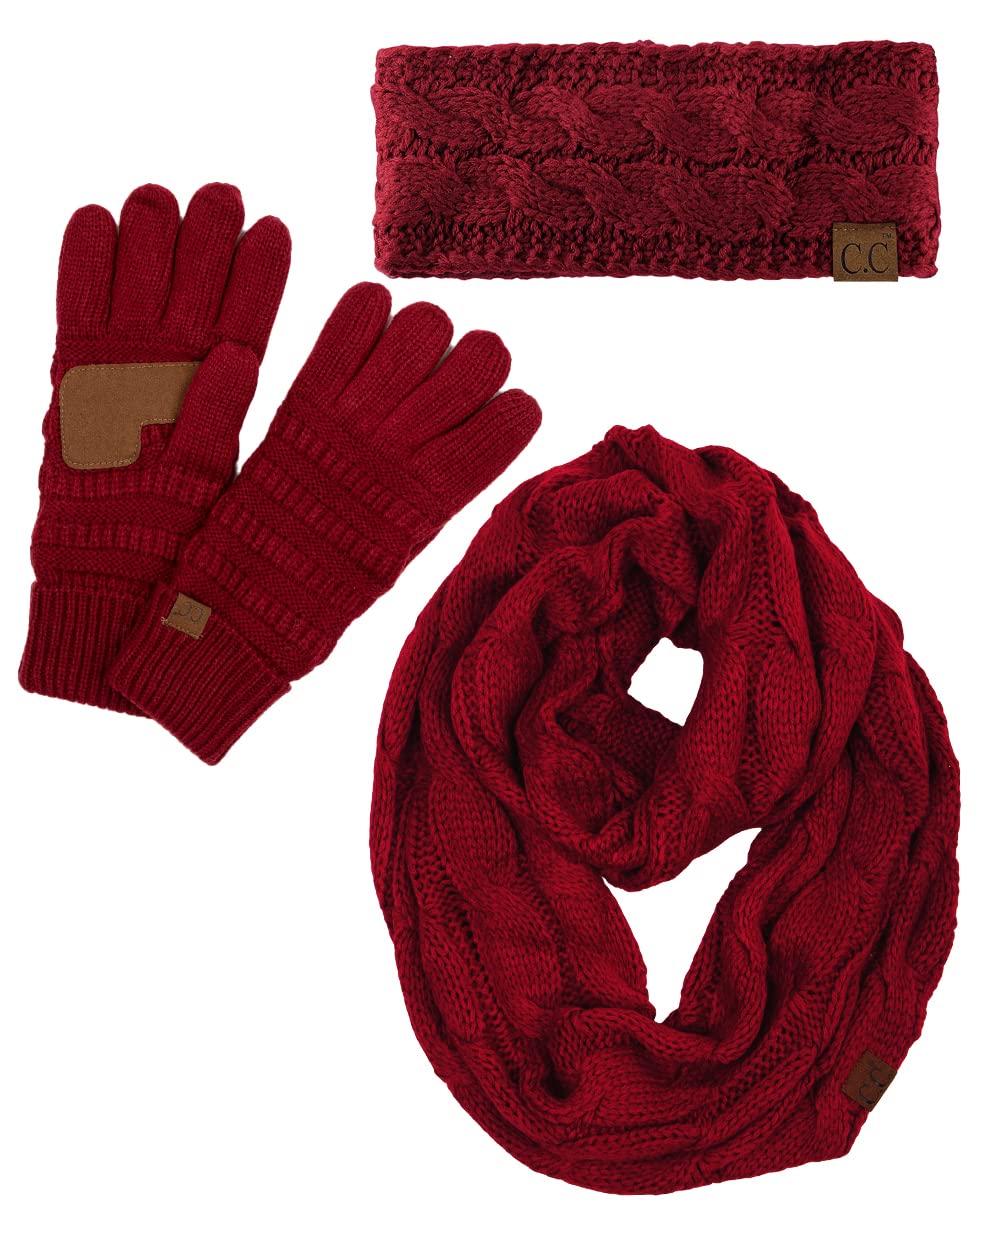 Headband, Scarf & Gloves Matching Set by Funky Junque